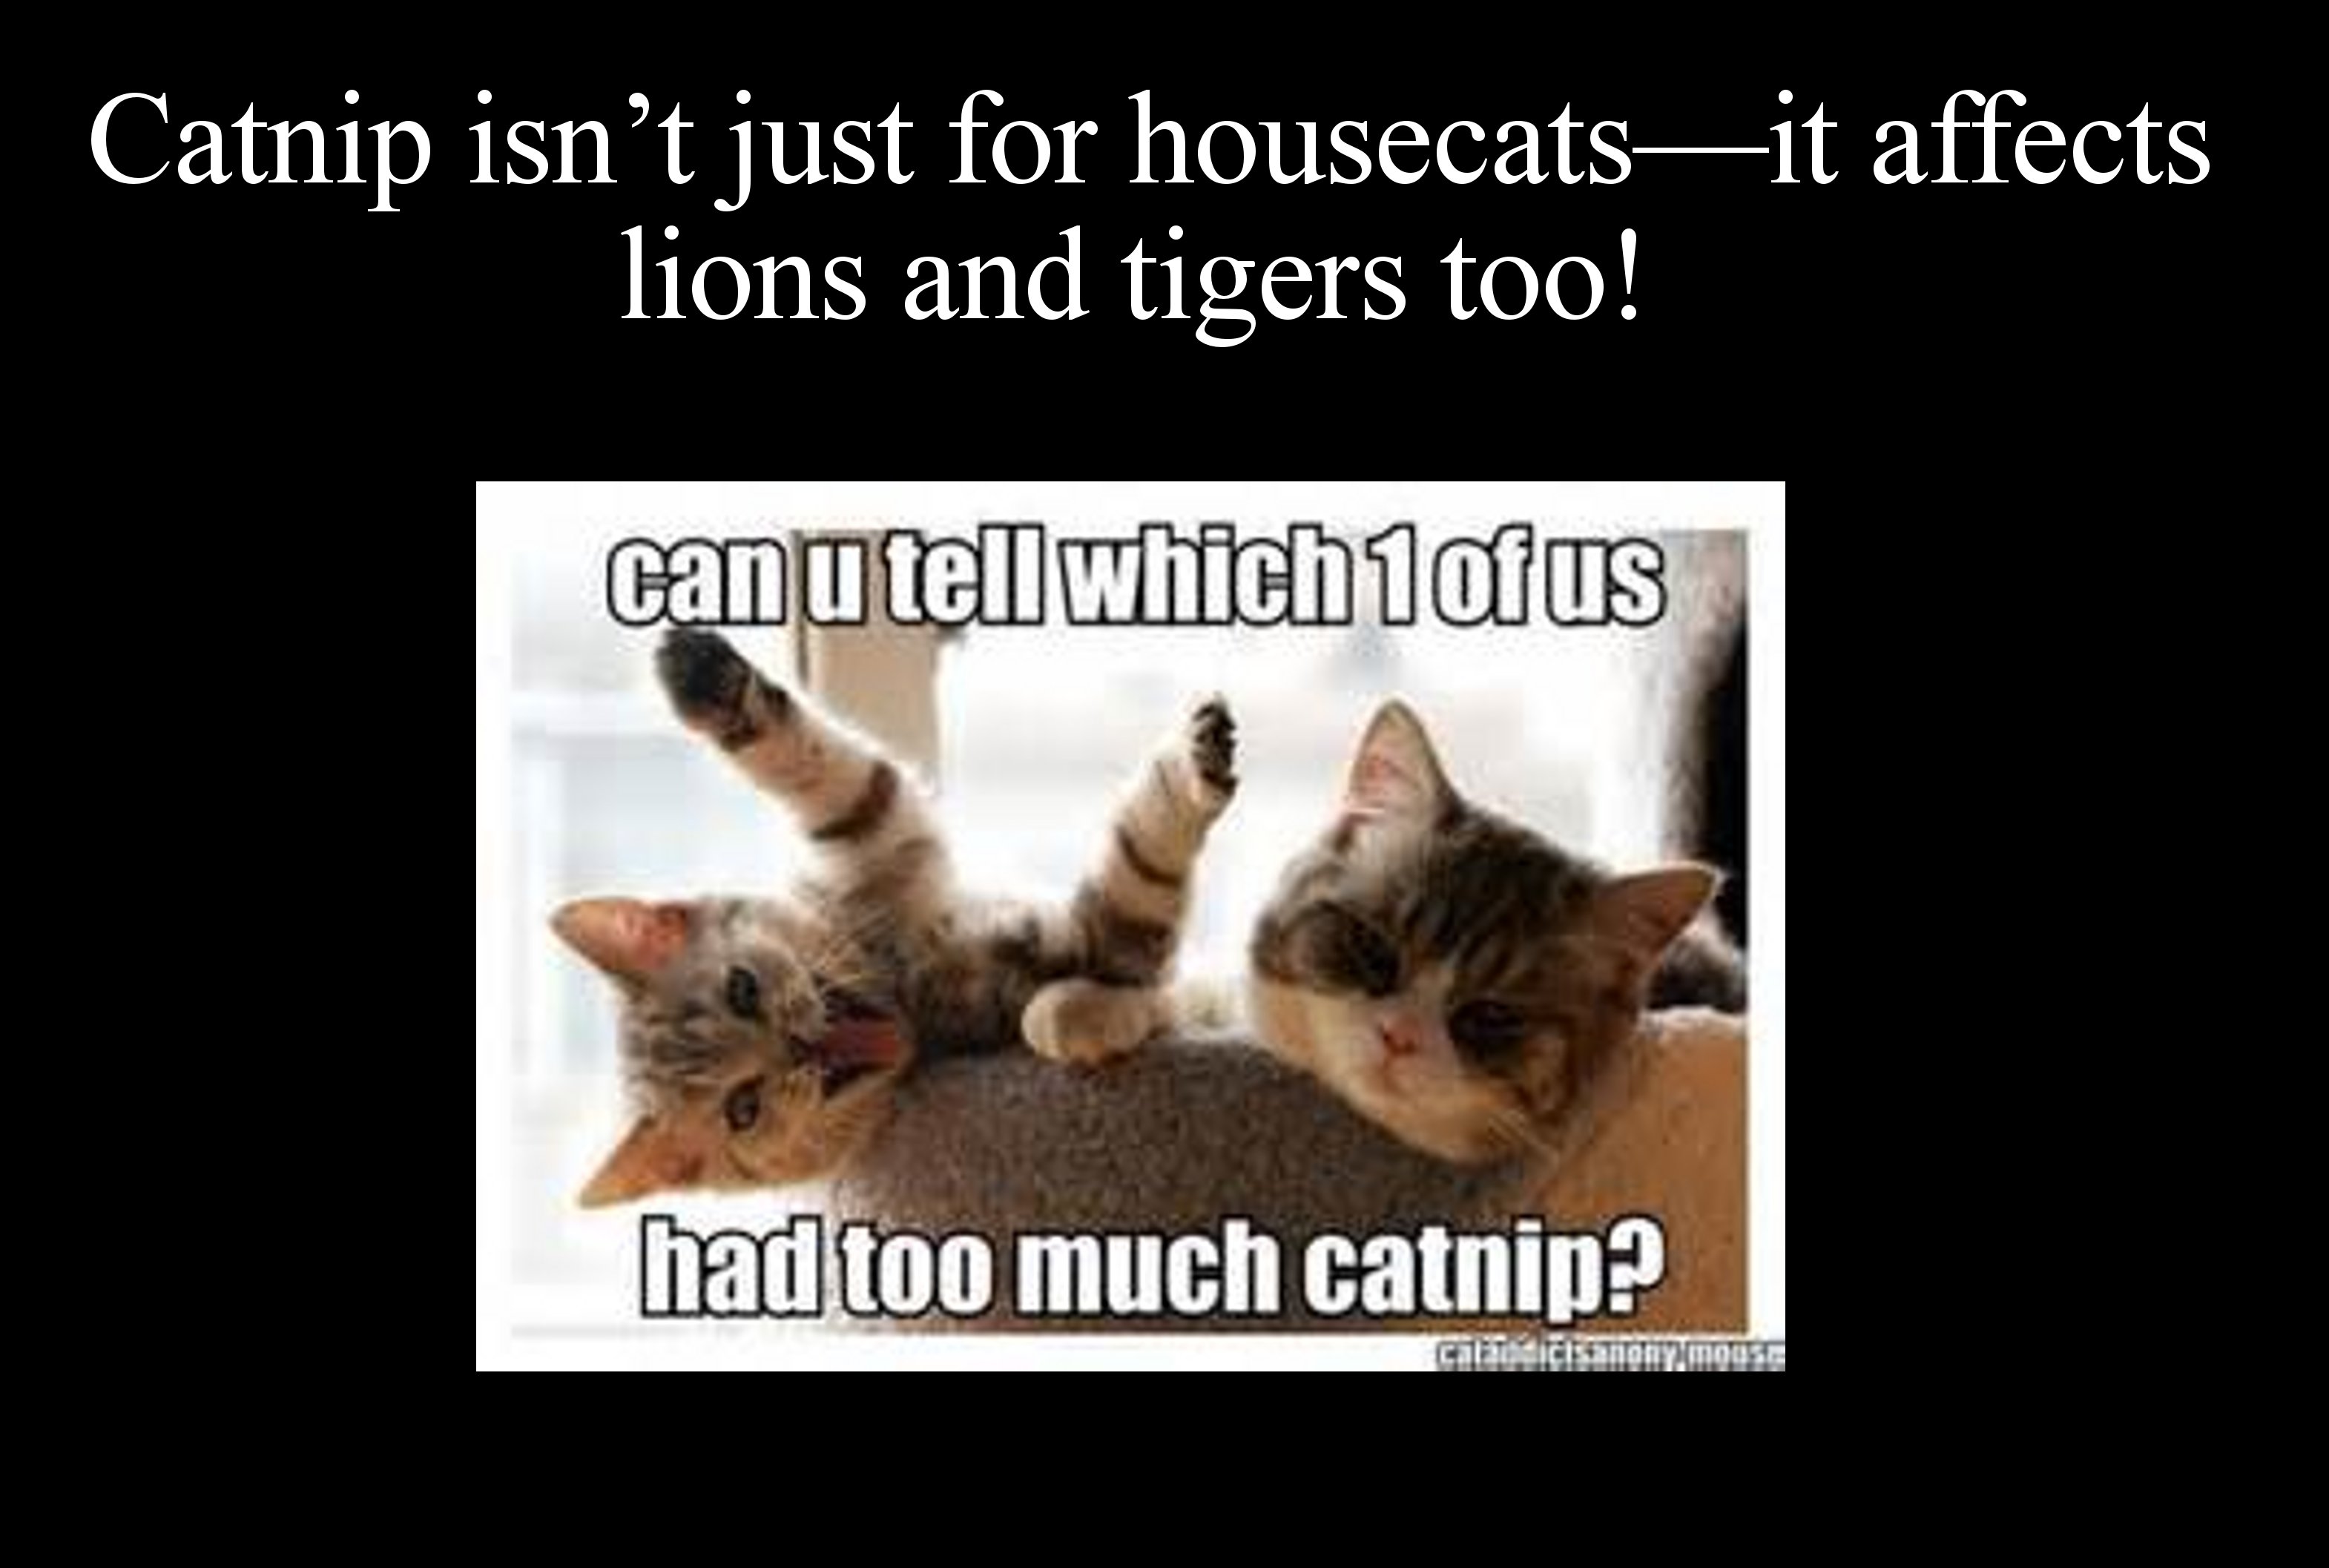 kitten catnip memes - Catnip isn't just for housecatsit affects lions and tigers too! canu tell which 1ofus had too much catnip? Calaoicisanny.mouse